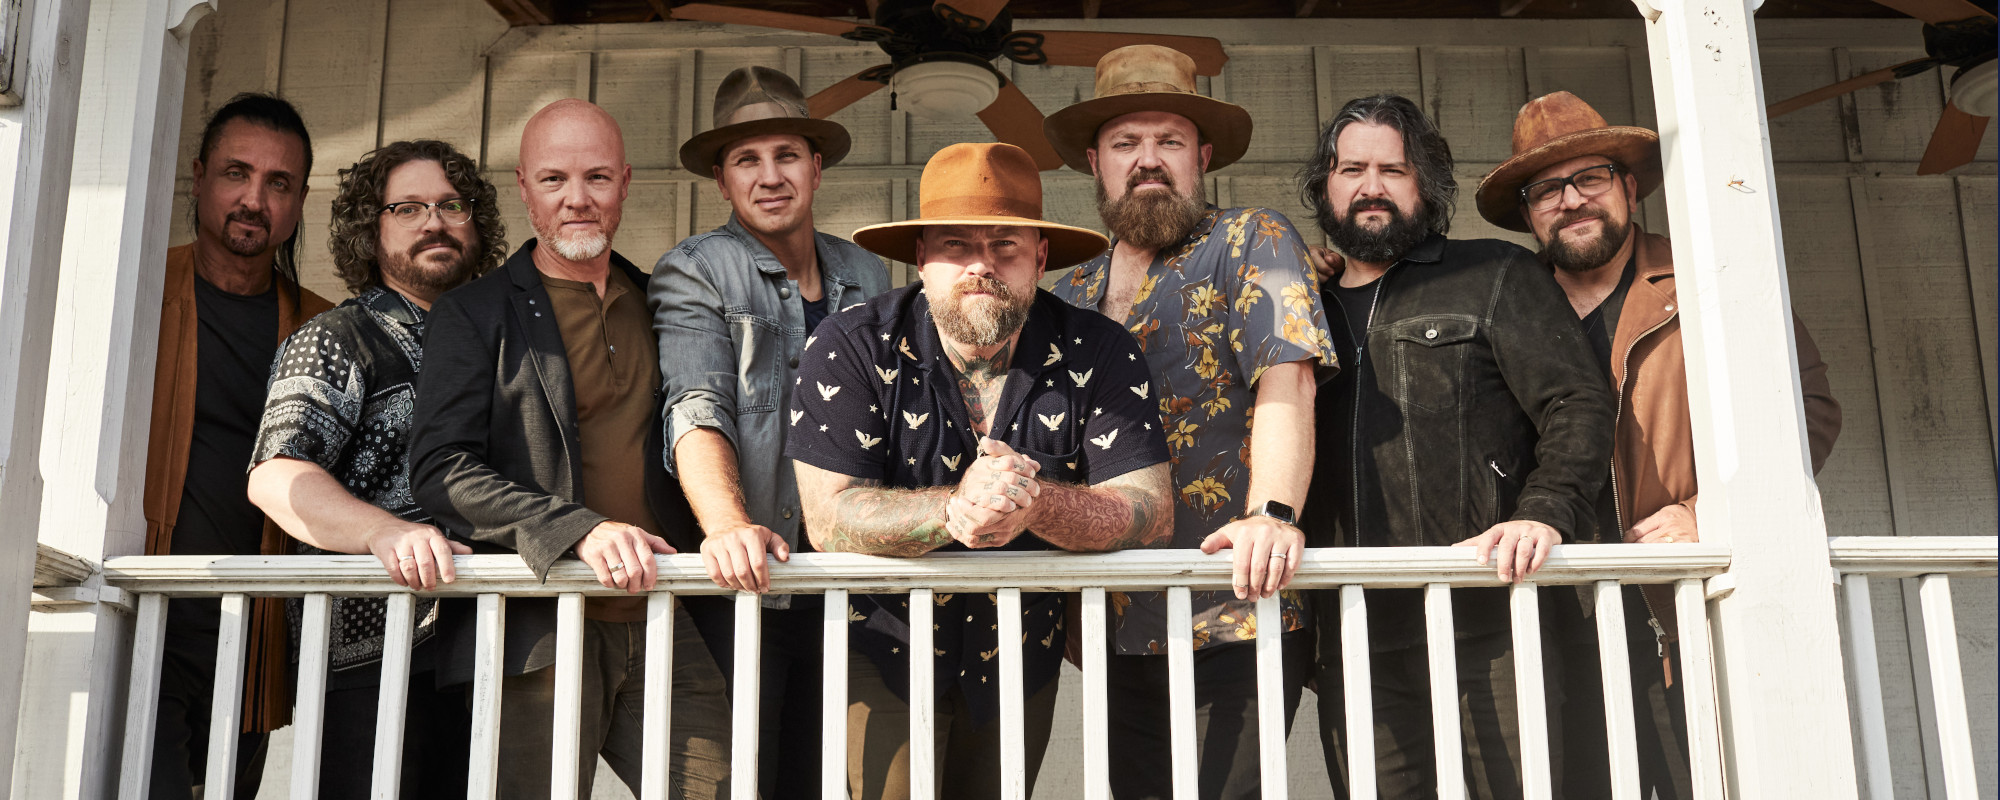 Exclusive: Zac Brown Band Announces New Collab with Ingrid Andress as Part of ‘The Comeback Deluxe’ Album